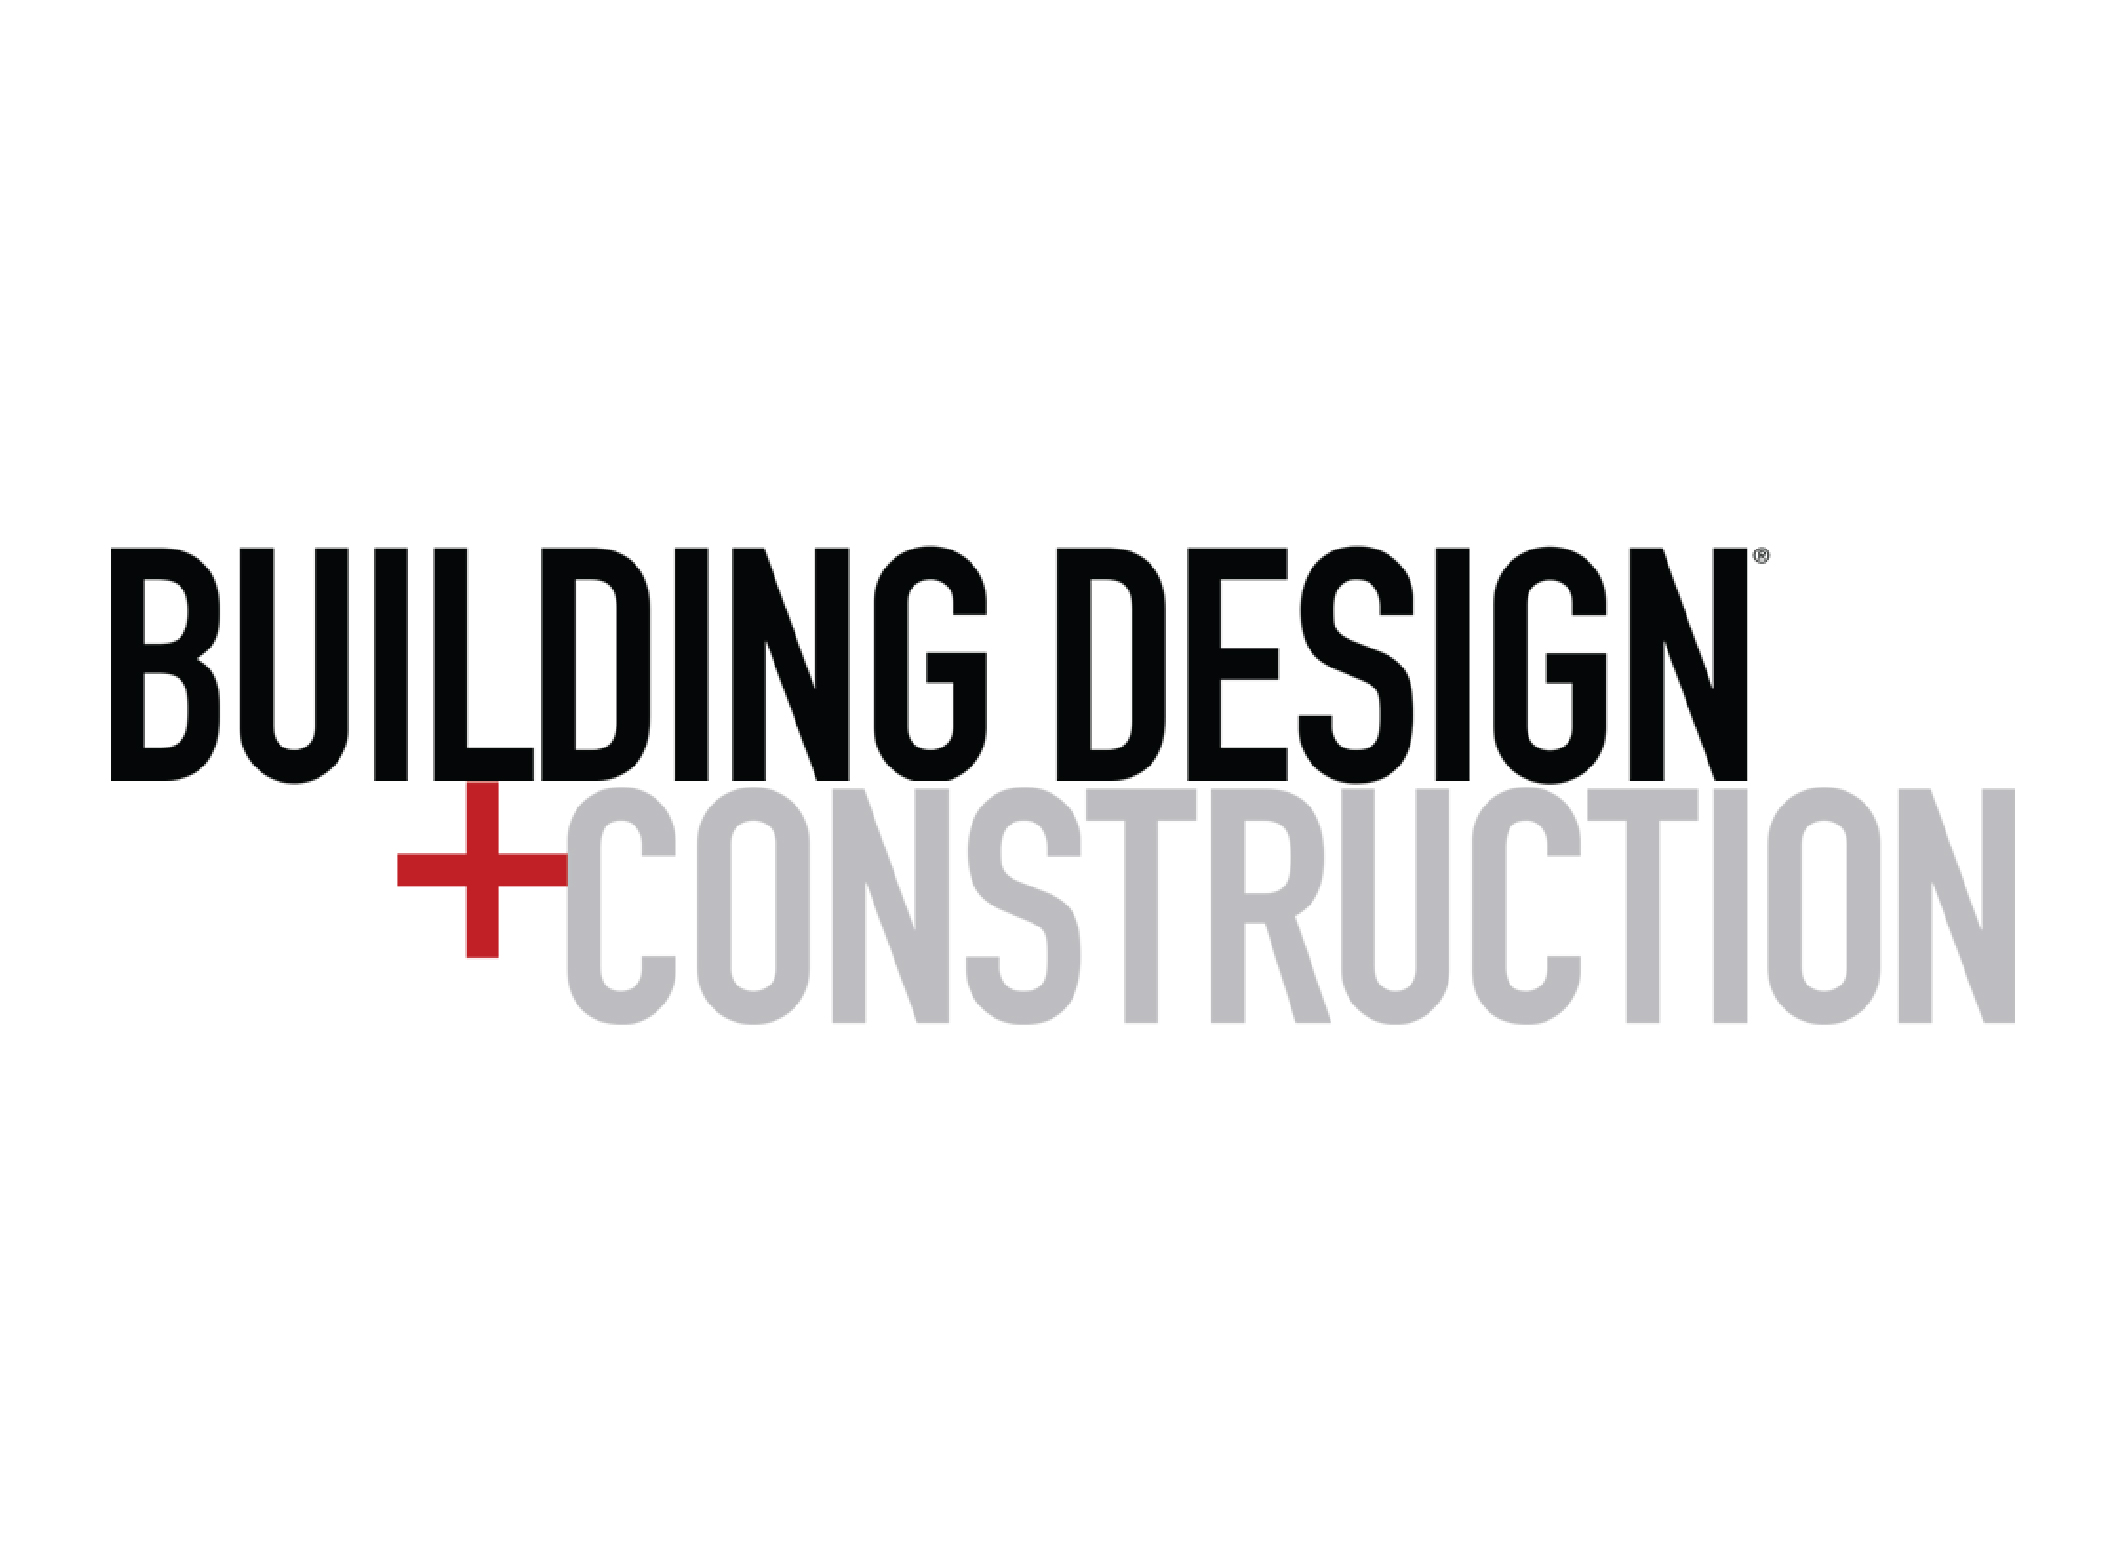 Primera Listed as Top Engineering/Architecture Firm in U.S. by Building Design+Construction